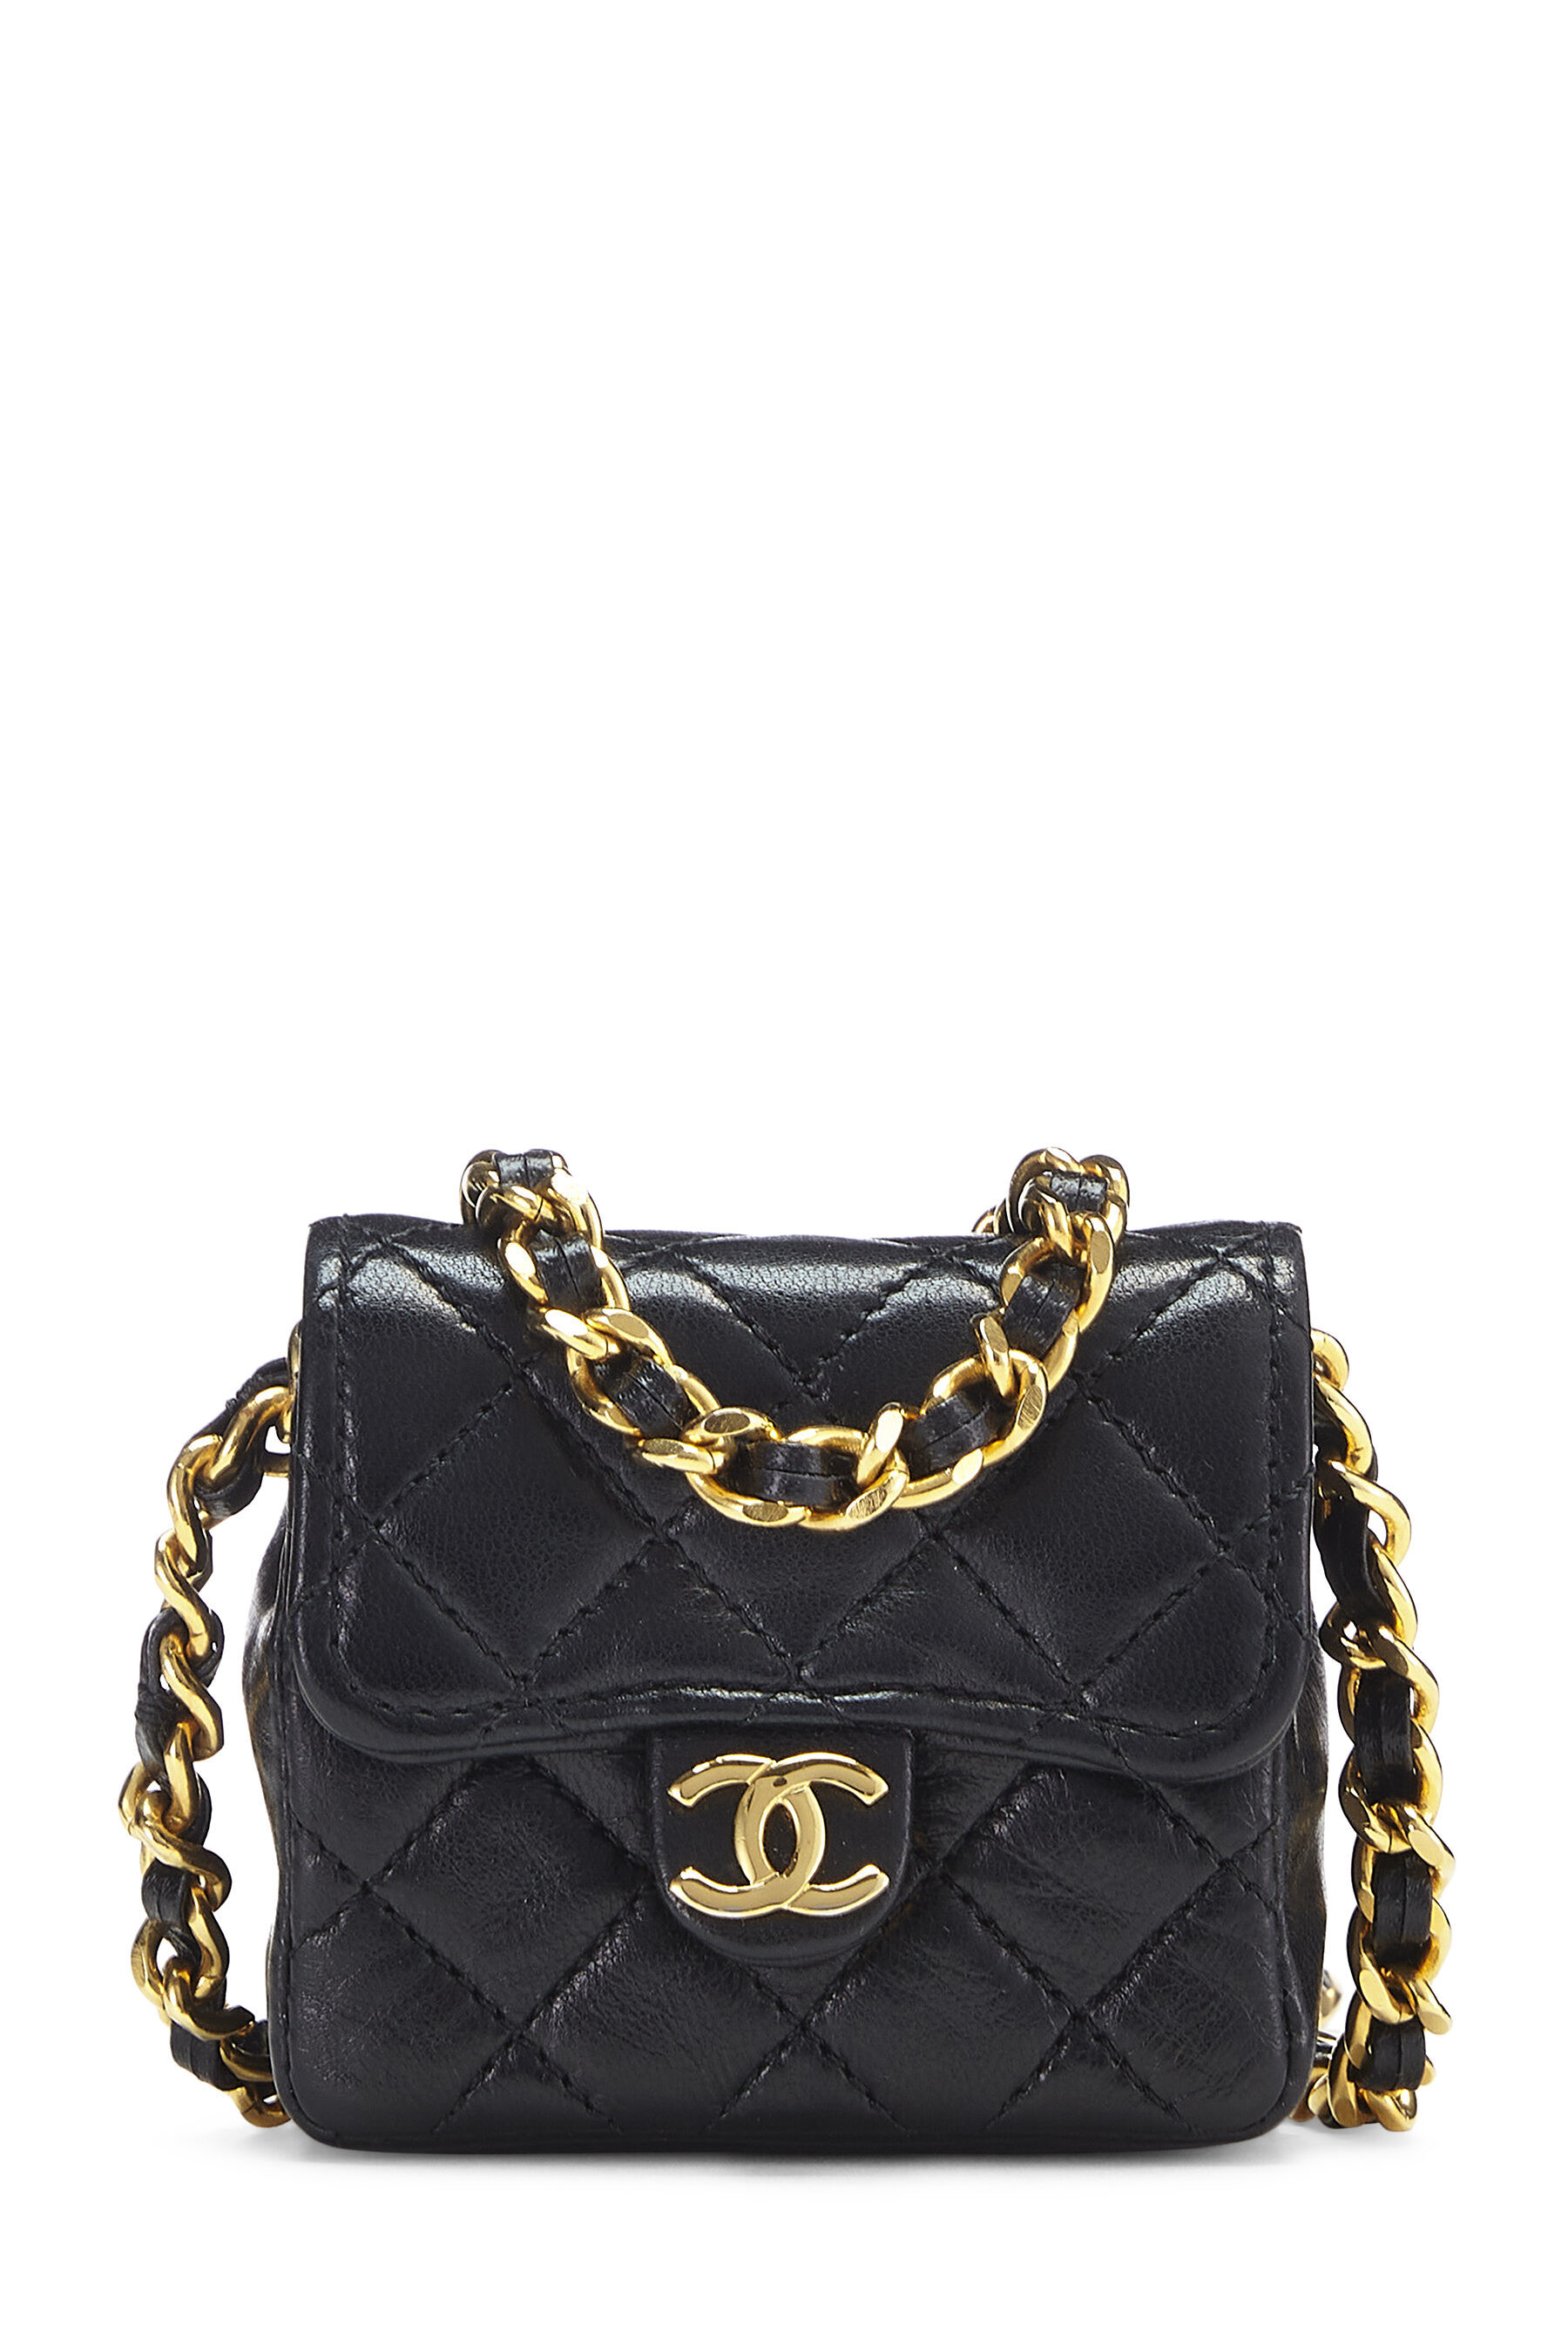 Chanel Black and Pink Beaded Small Flap Bag | Consign of the Times ™